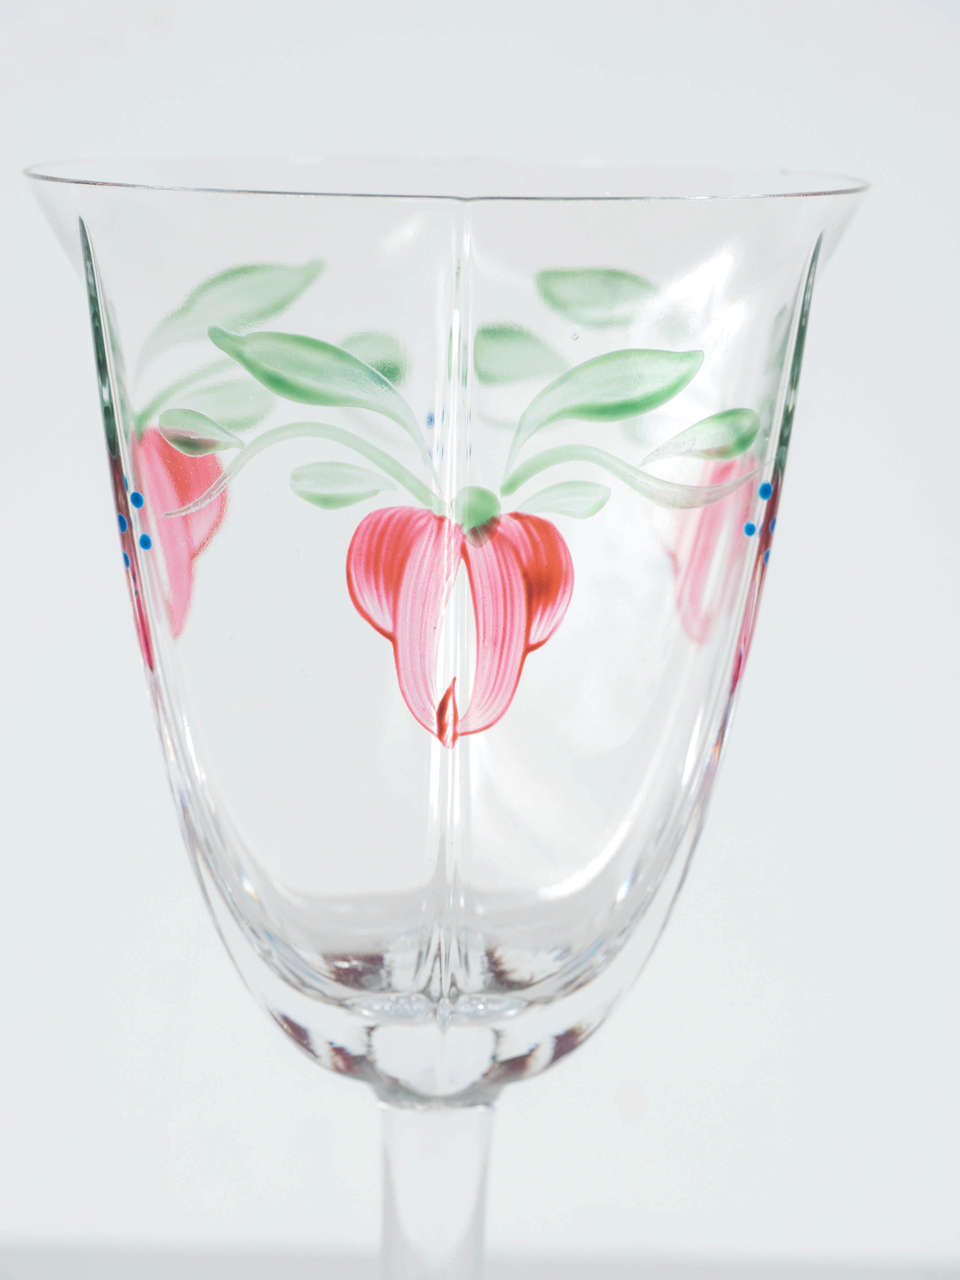 American Set of Twelve Hand-Painted Glasses with Stylized Floral and Foliage Design